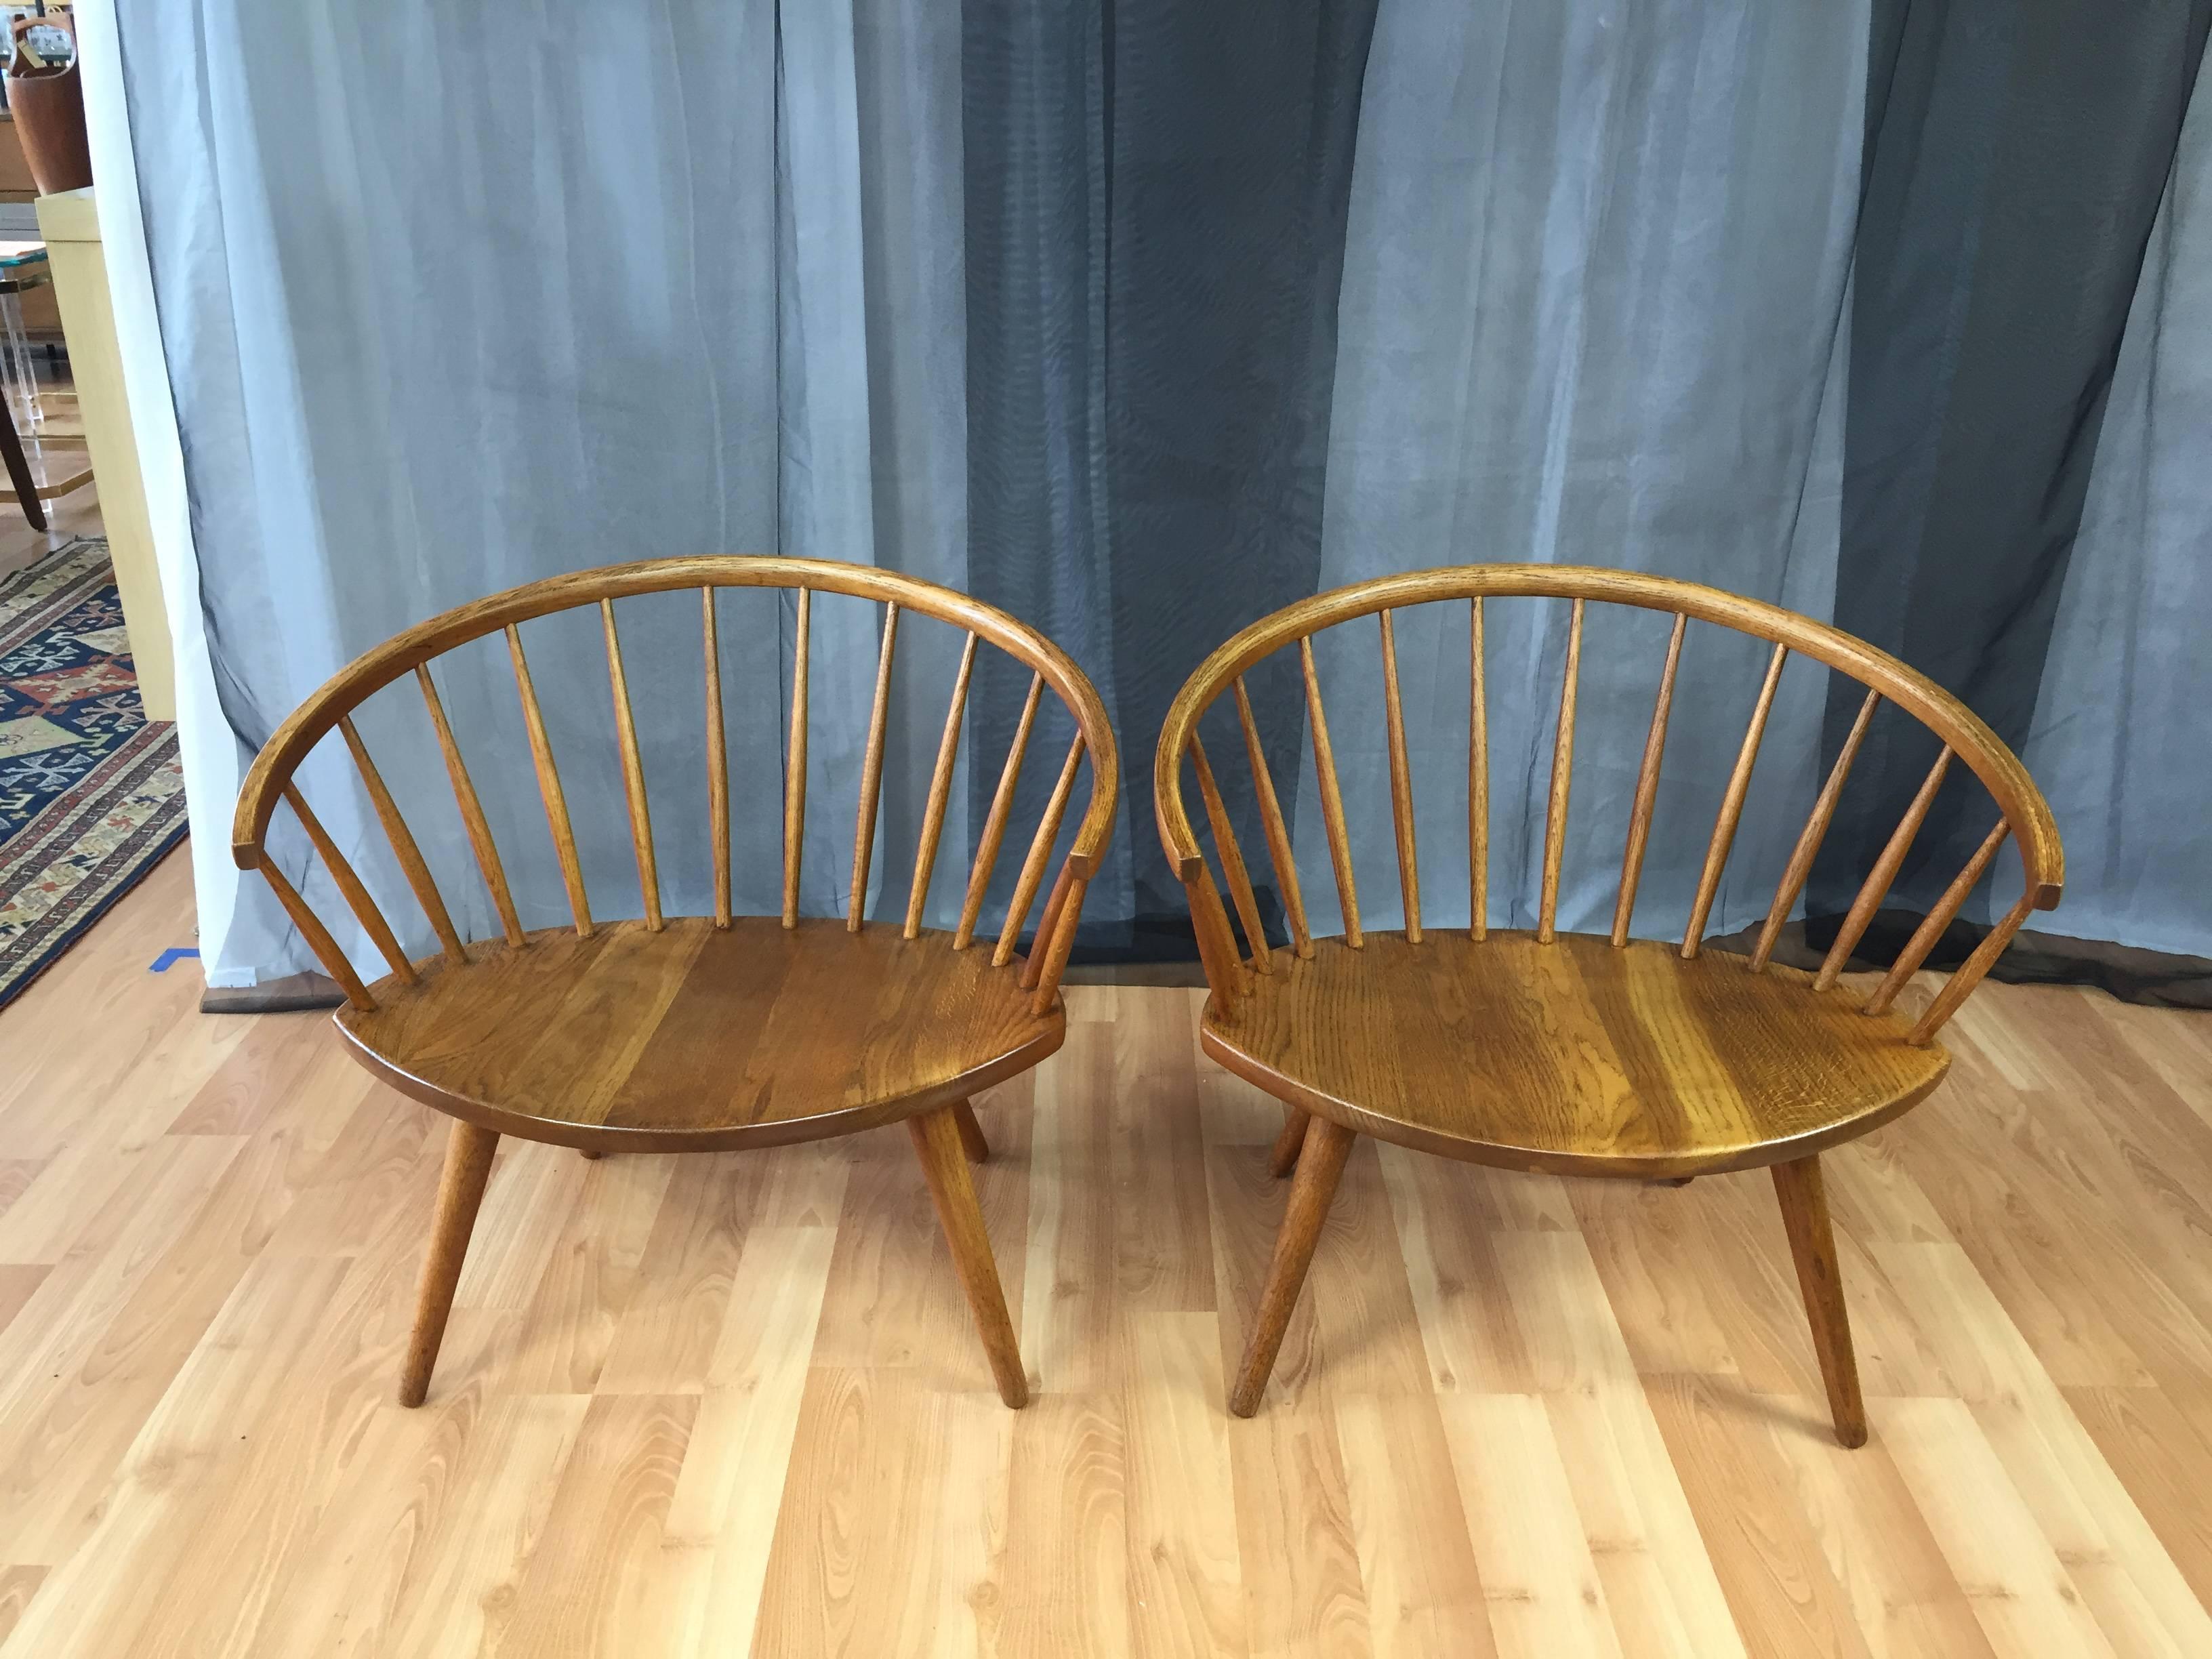 A pair of oak “Arka” low captain’s chairs designed by Yngve Ekström and produced by Stolab.

A sought-after Scandinavian design Classic that skillfully plays with the proportions of a traditional captain’s chair. Very well crafted of solid oak